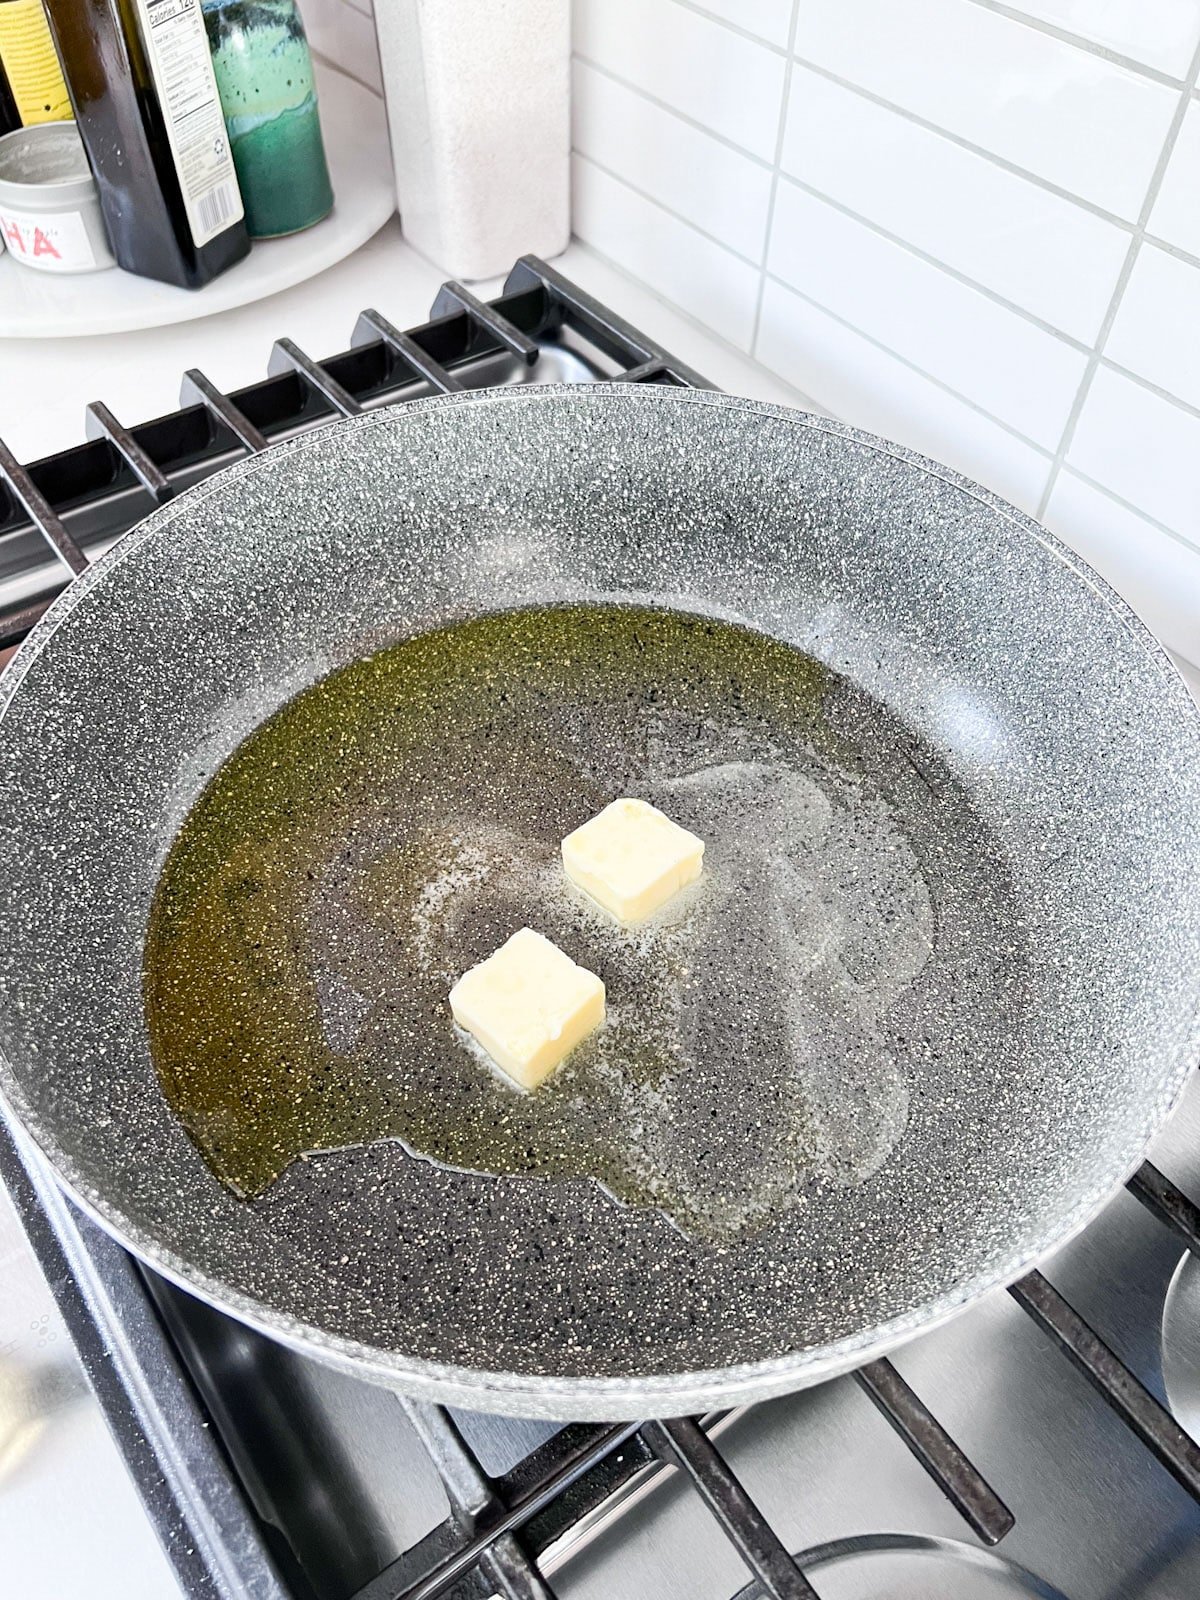 A skillet on a stove with butter and oil melting together.